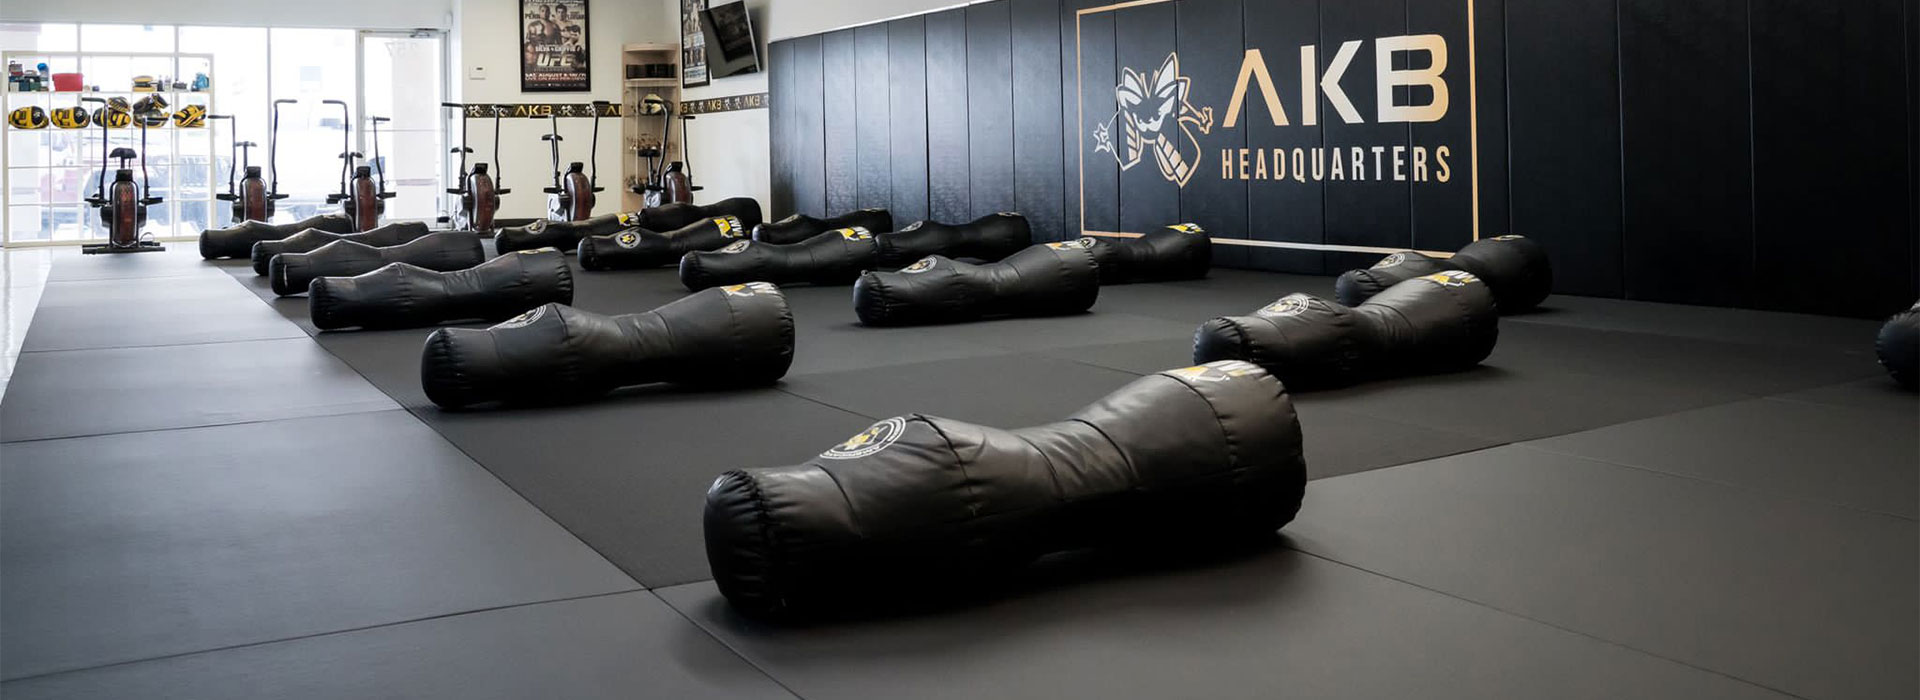 Essential martial arts equipment for AKB association in Central Florida